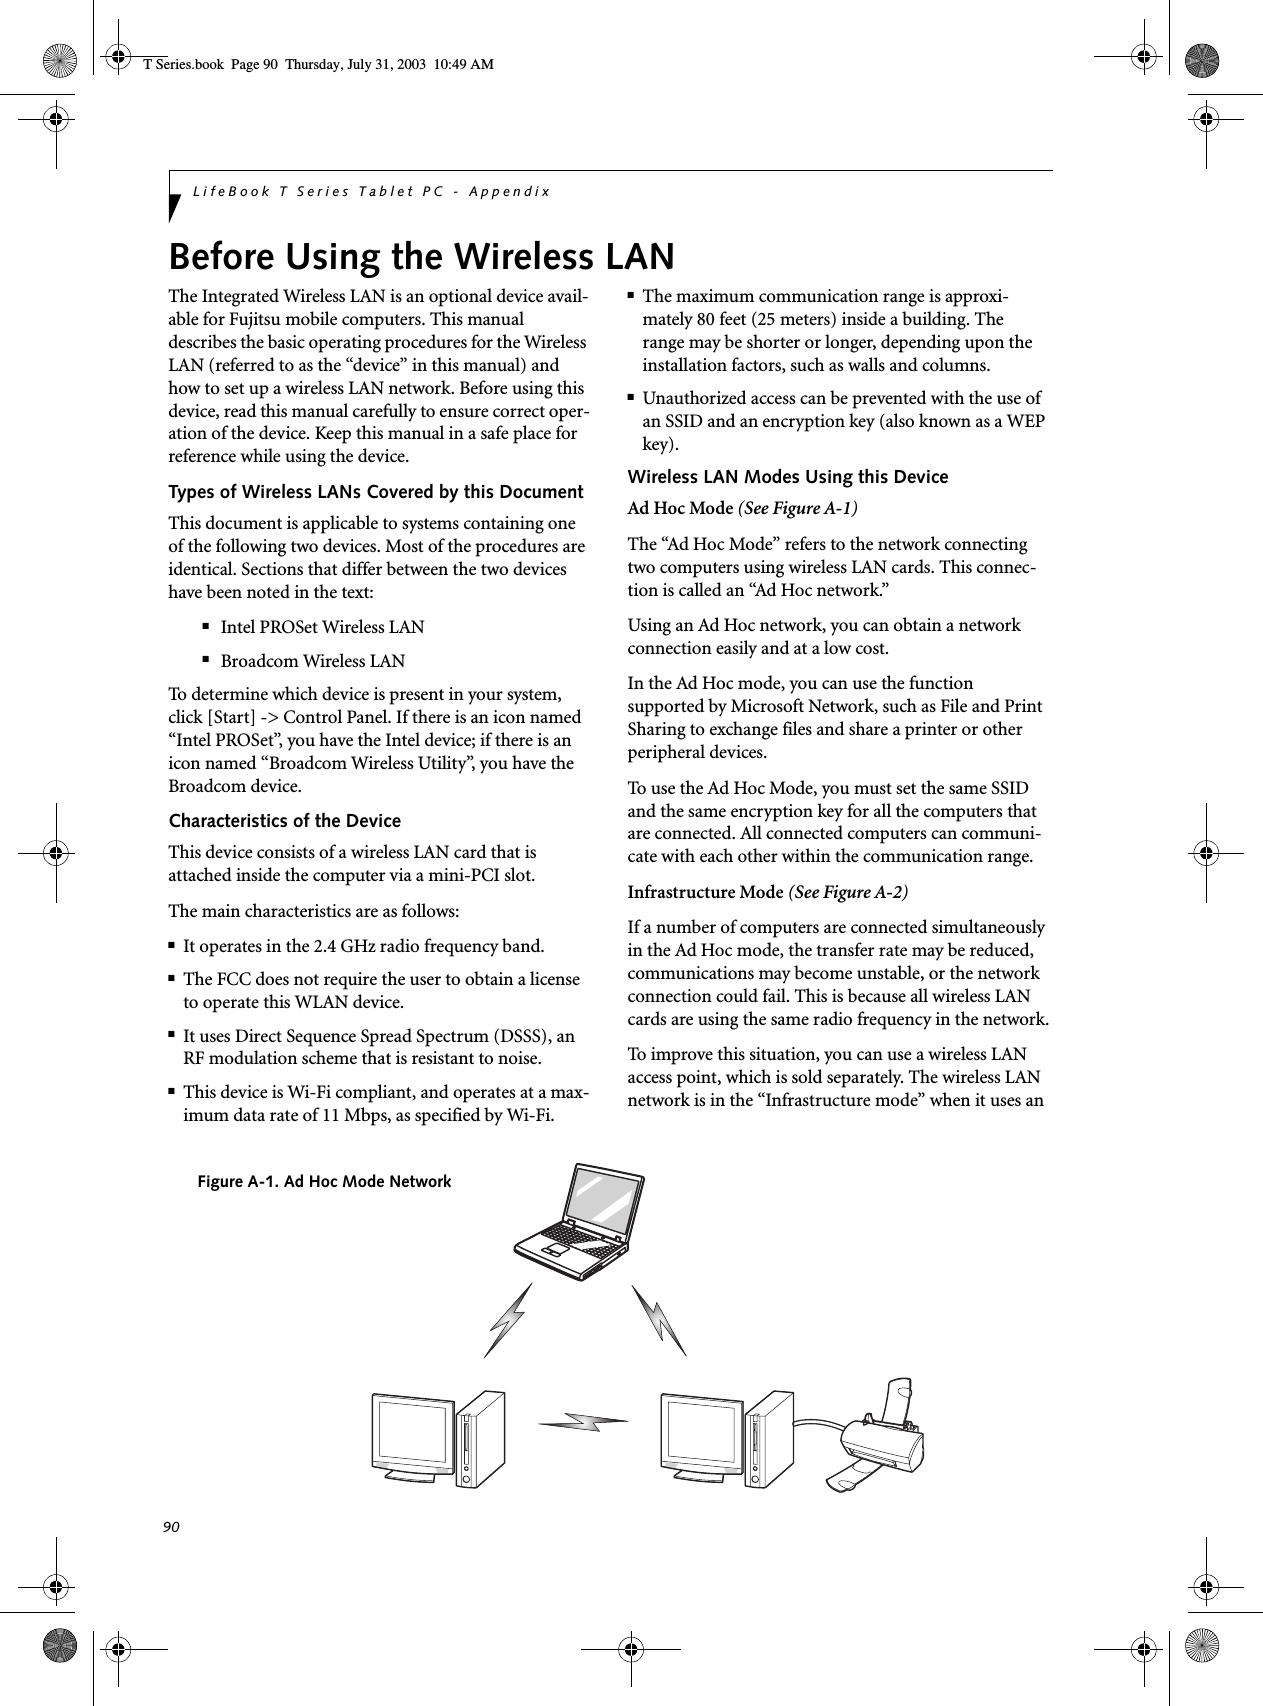 90LifeBook T Series Tablet PC - AppendixBefore Using the Wireless LANThe Integrated Wireless LAN is an optional device avail-able for Fujitsu mobile computers. This manual describes the basic operating procedures for the Wireless LAN (referred to as the “device” in this manual) and how to set up a wireless LAN network. Before using this device, read this manual carefully to ensure correct oper-ation of the device. Keep this manual in a safe place for reference while using the device.Types of Wireless LANs Covered by this DocumentThis document is applicable to systems containing one of the following two devices. Most of the procedures are identical. Sections that differ between the two devices have been noted in the text:■Intel PROSet Wireless LAN■Broadcom Wireless LANTo determine which device is present in your system, click [Start] -&gt; Control Panel. If there is an icon named “Intel PROSet”, you have the Intel device; if there is an icon named “Broadcom Wireless Utility”, you have the Broadcom device. Characteristics of the DeviceThis device consists of a wireless LAN card that is attached inside the computer via a mini-PCI slot.The main characteristics are as follows:■It operates in the 2.4 GHz radio frequency band.■The FCC does not require the user to obtain a license to operate this WLAN device.■It uses Direct Sequence Spread Spectrum (DSSS), an RF modulation scheme that is resistant to noise.■This device is Wi-Fi compliant, and operates at a max-imum data rate of 11 Mbps, as specified by Wi-Fi.■The maximum communication range is approxi-mately 80 feet (25 meters) inside a building. The range may be shorter or longer, depending upon the installation factors, such as walls and columns.■Unauthorized access can be prevented with the use of an SSID and an encryption key (also known as a WEP key).Wireless LAN Modes Using this DeviceAd Hoc Mode (See Figure A-1)The “Ad Hoc Mode” refers to the network connecting two computers using wireless LAN cards. This connec-tion is called an “Ad Hoc network.”Using an Ad Hoc network, you can obtain a network connection easily and at a low cost.In the Ad Hoc mode, you can use the function supported by Microsoft Network, such as File and Print Sharing to exchange files and share a printer or other peripheral devices.To use the Ad Hoc Mode, you must set the same SSID and the same encryption key for all the computers that are connected. All connected computers can communi-cate with each other within the communication range. Infrastructure Mode (See Figure A-2)If a number of computers are connected simultaneously in the Ad Hoc mode, the transfer rate may be reduced, communications may become unstable, or the network connection could fail. This is because all wireless LAN cards are using the same radio frequency in the network.To improve this situation, you can use a wireless LAN access point, which is sold separately. The wireless LAN network is in the “Infrastructure mode” when it uses an Figure A-1. Ad Hoc Mode NetworkT Series.book  Page 90  Thursday, July 31, 2003  10:49 AM